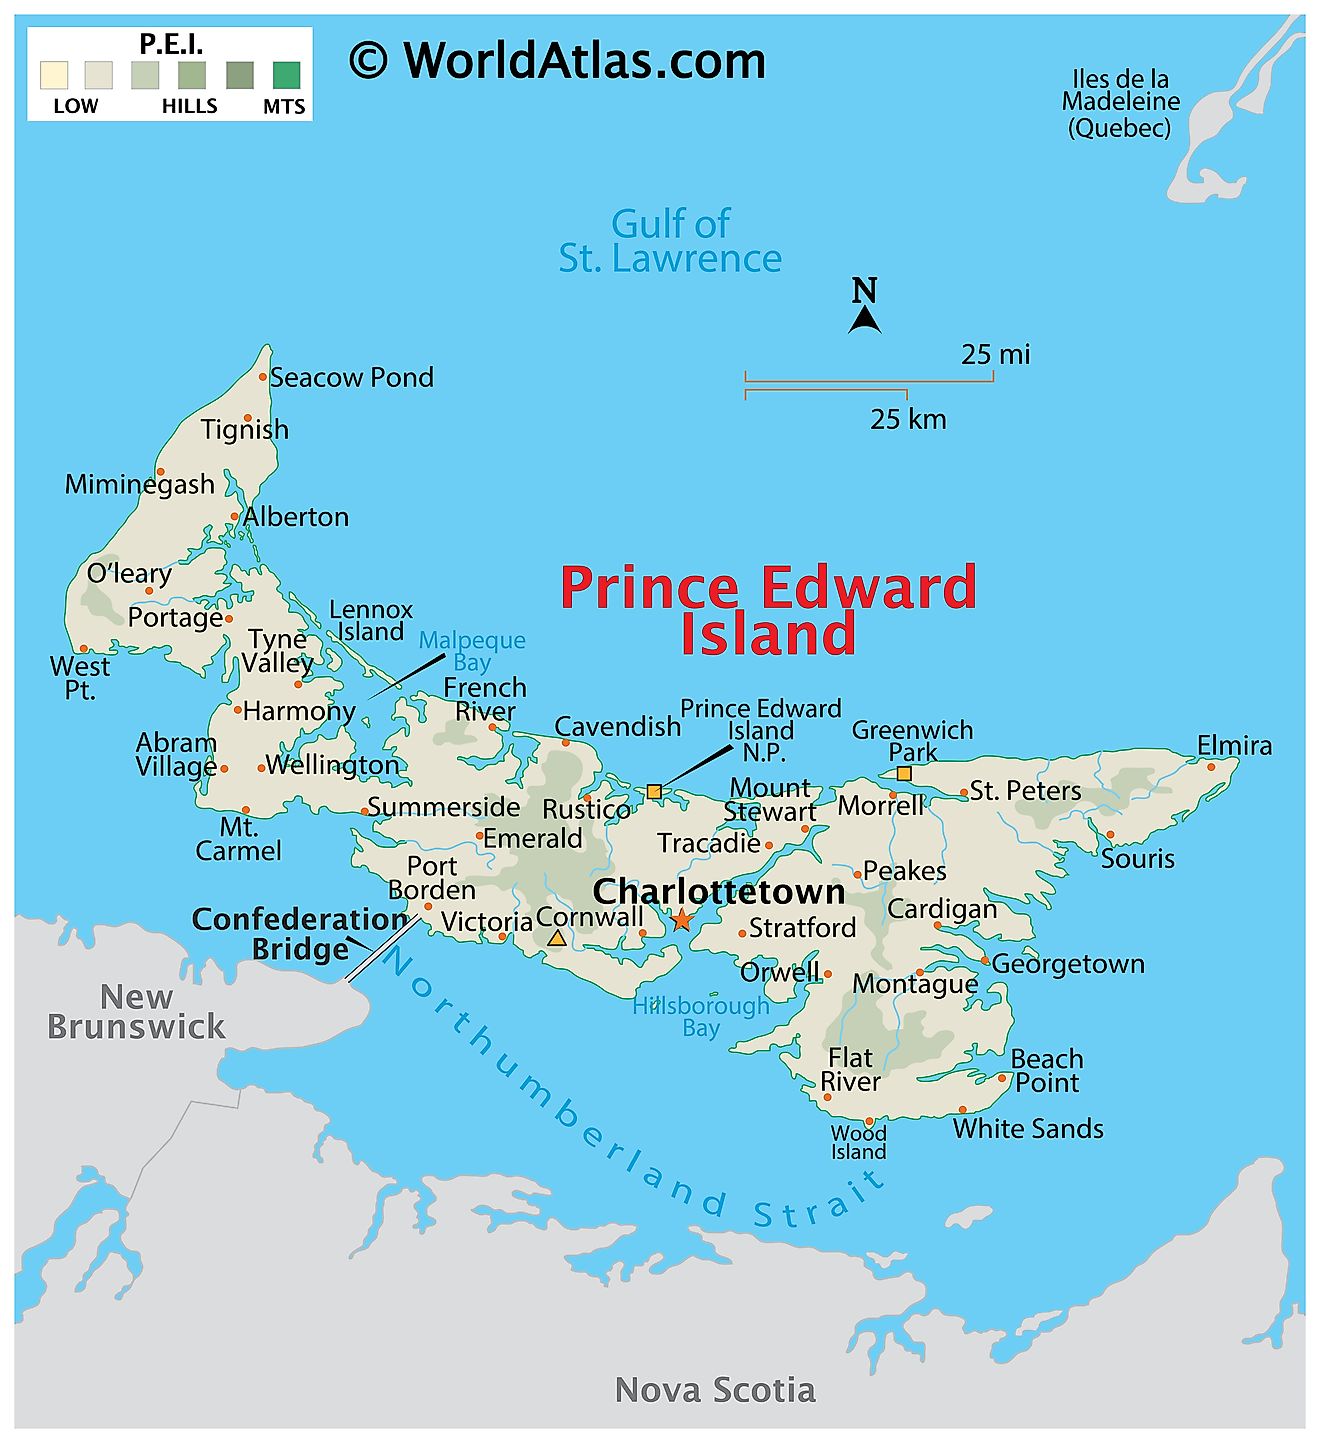 Physical Map of Prince Edward Island. It shows the physical features of Prince Edward Island, including small hills and bays. 